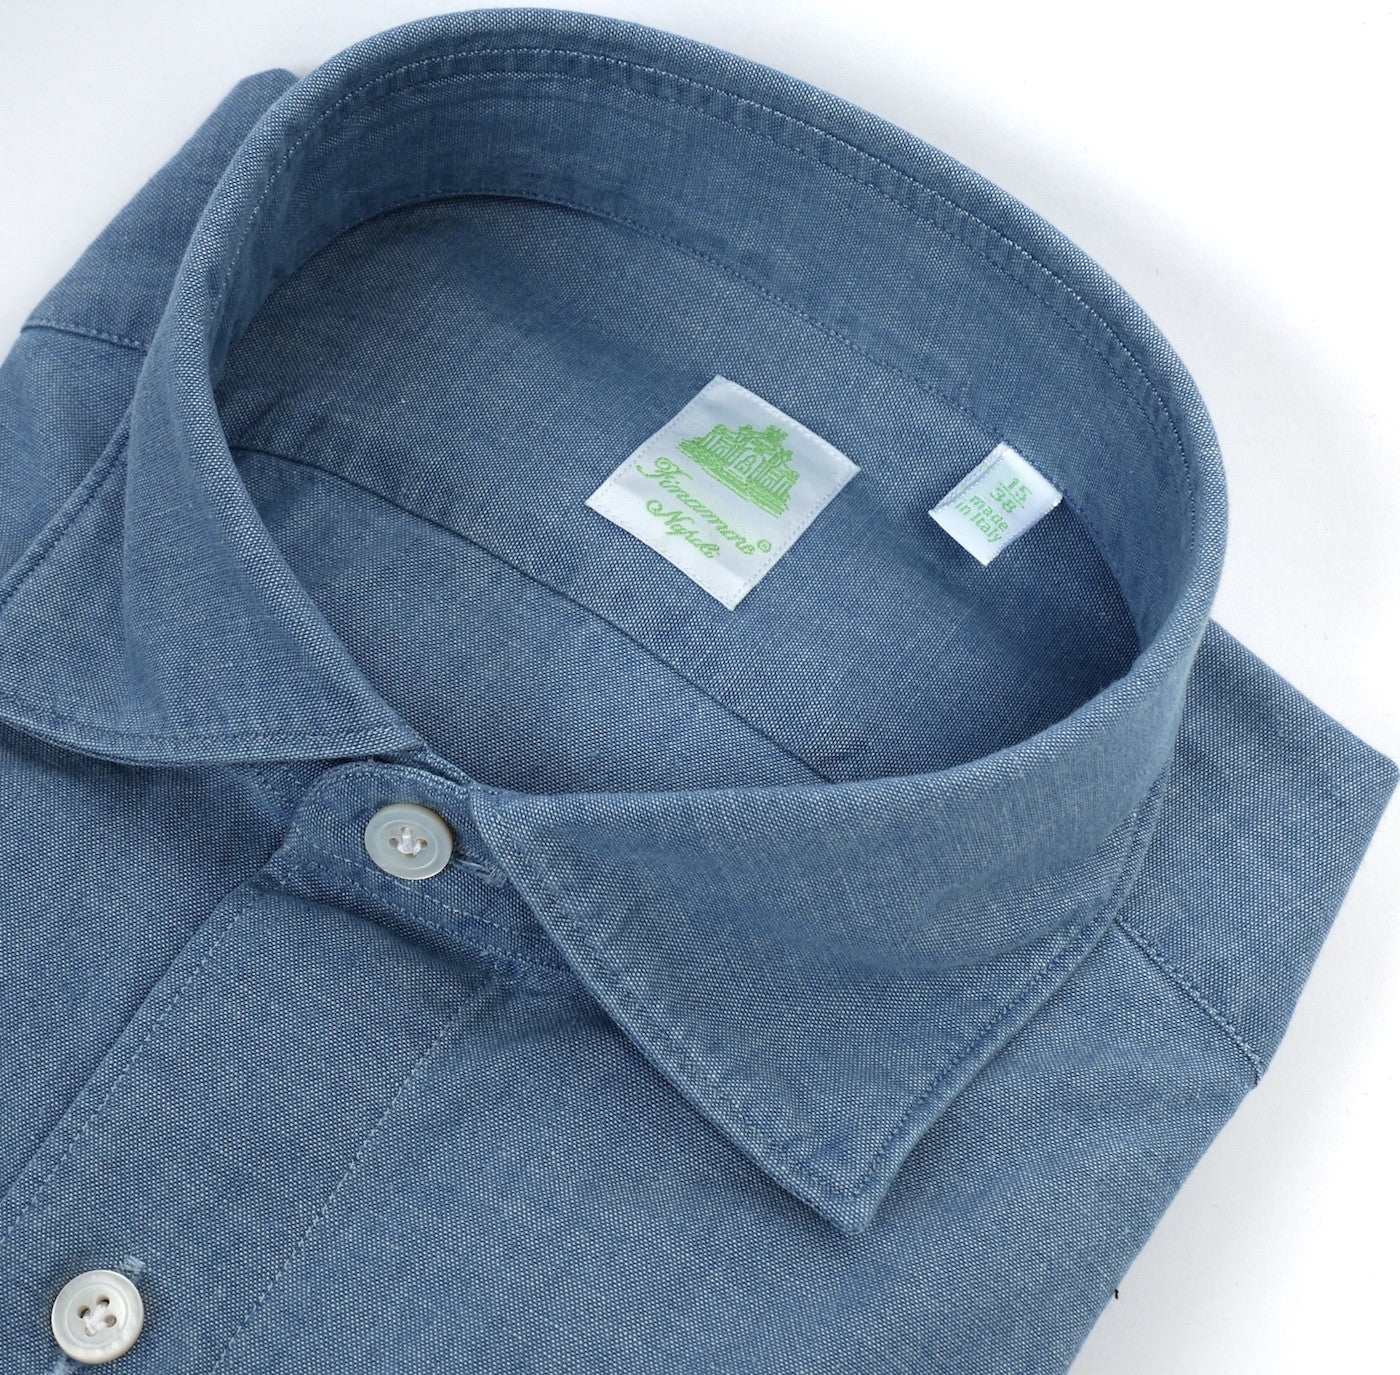 Chambray tailored shirt from the Gaeta line